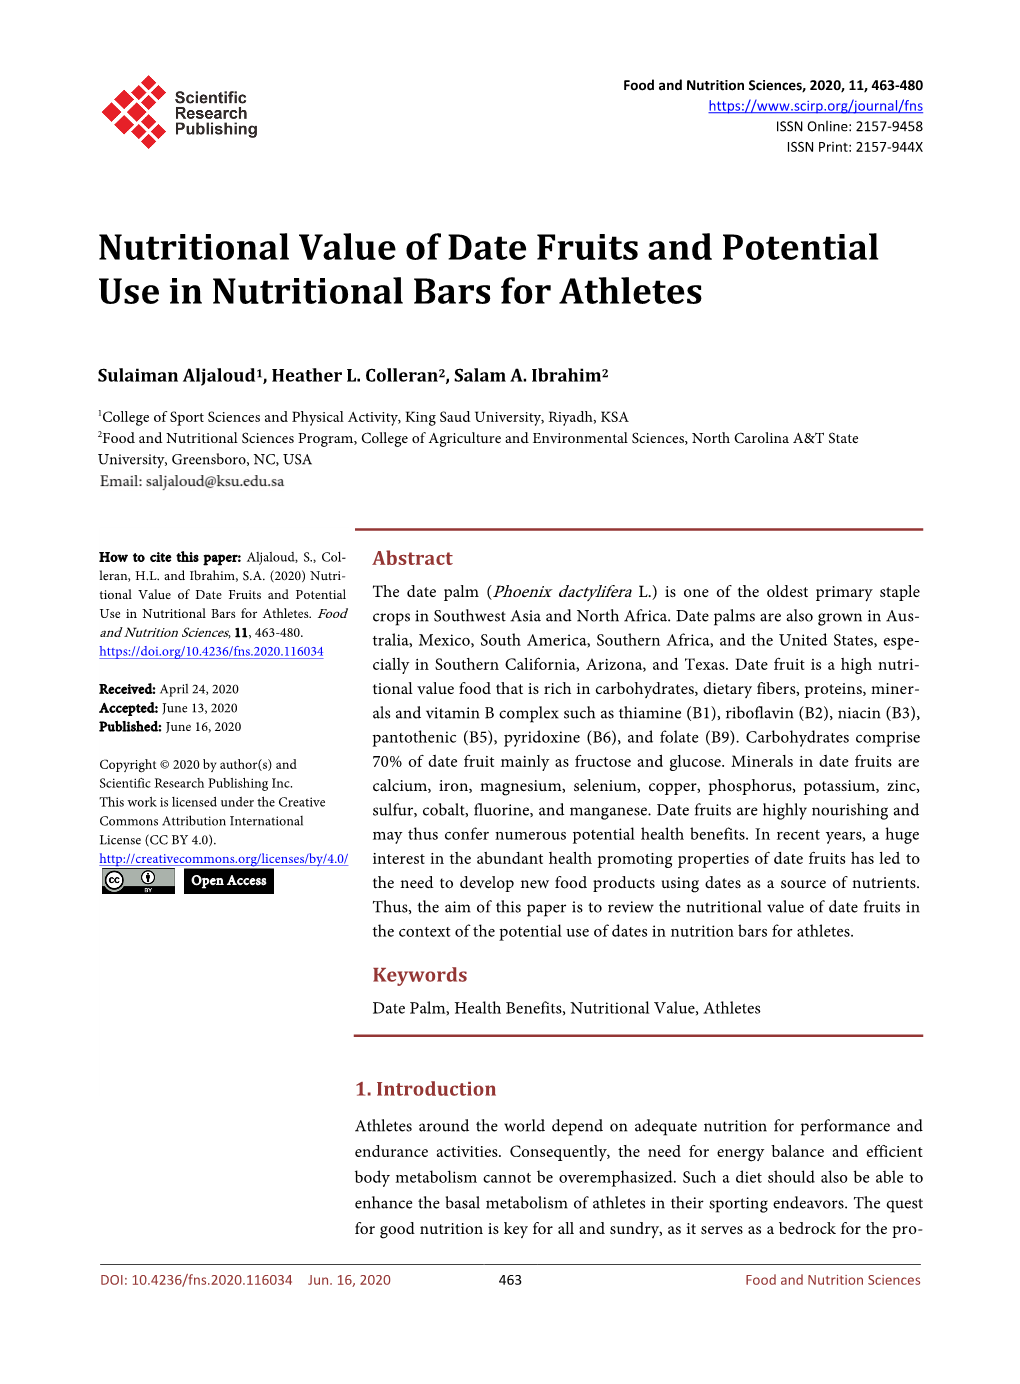 Nutritional Value of Date Fruits and Potential Use in Nutritional Bars for Athletes